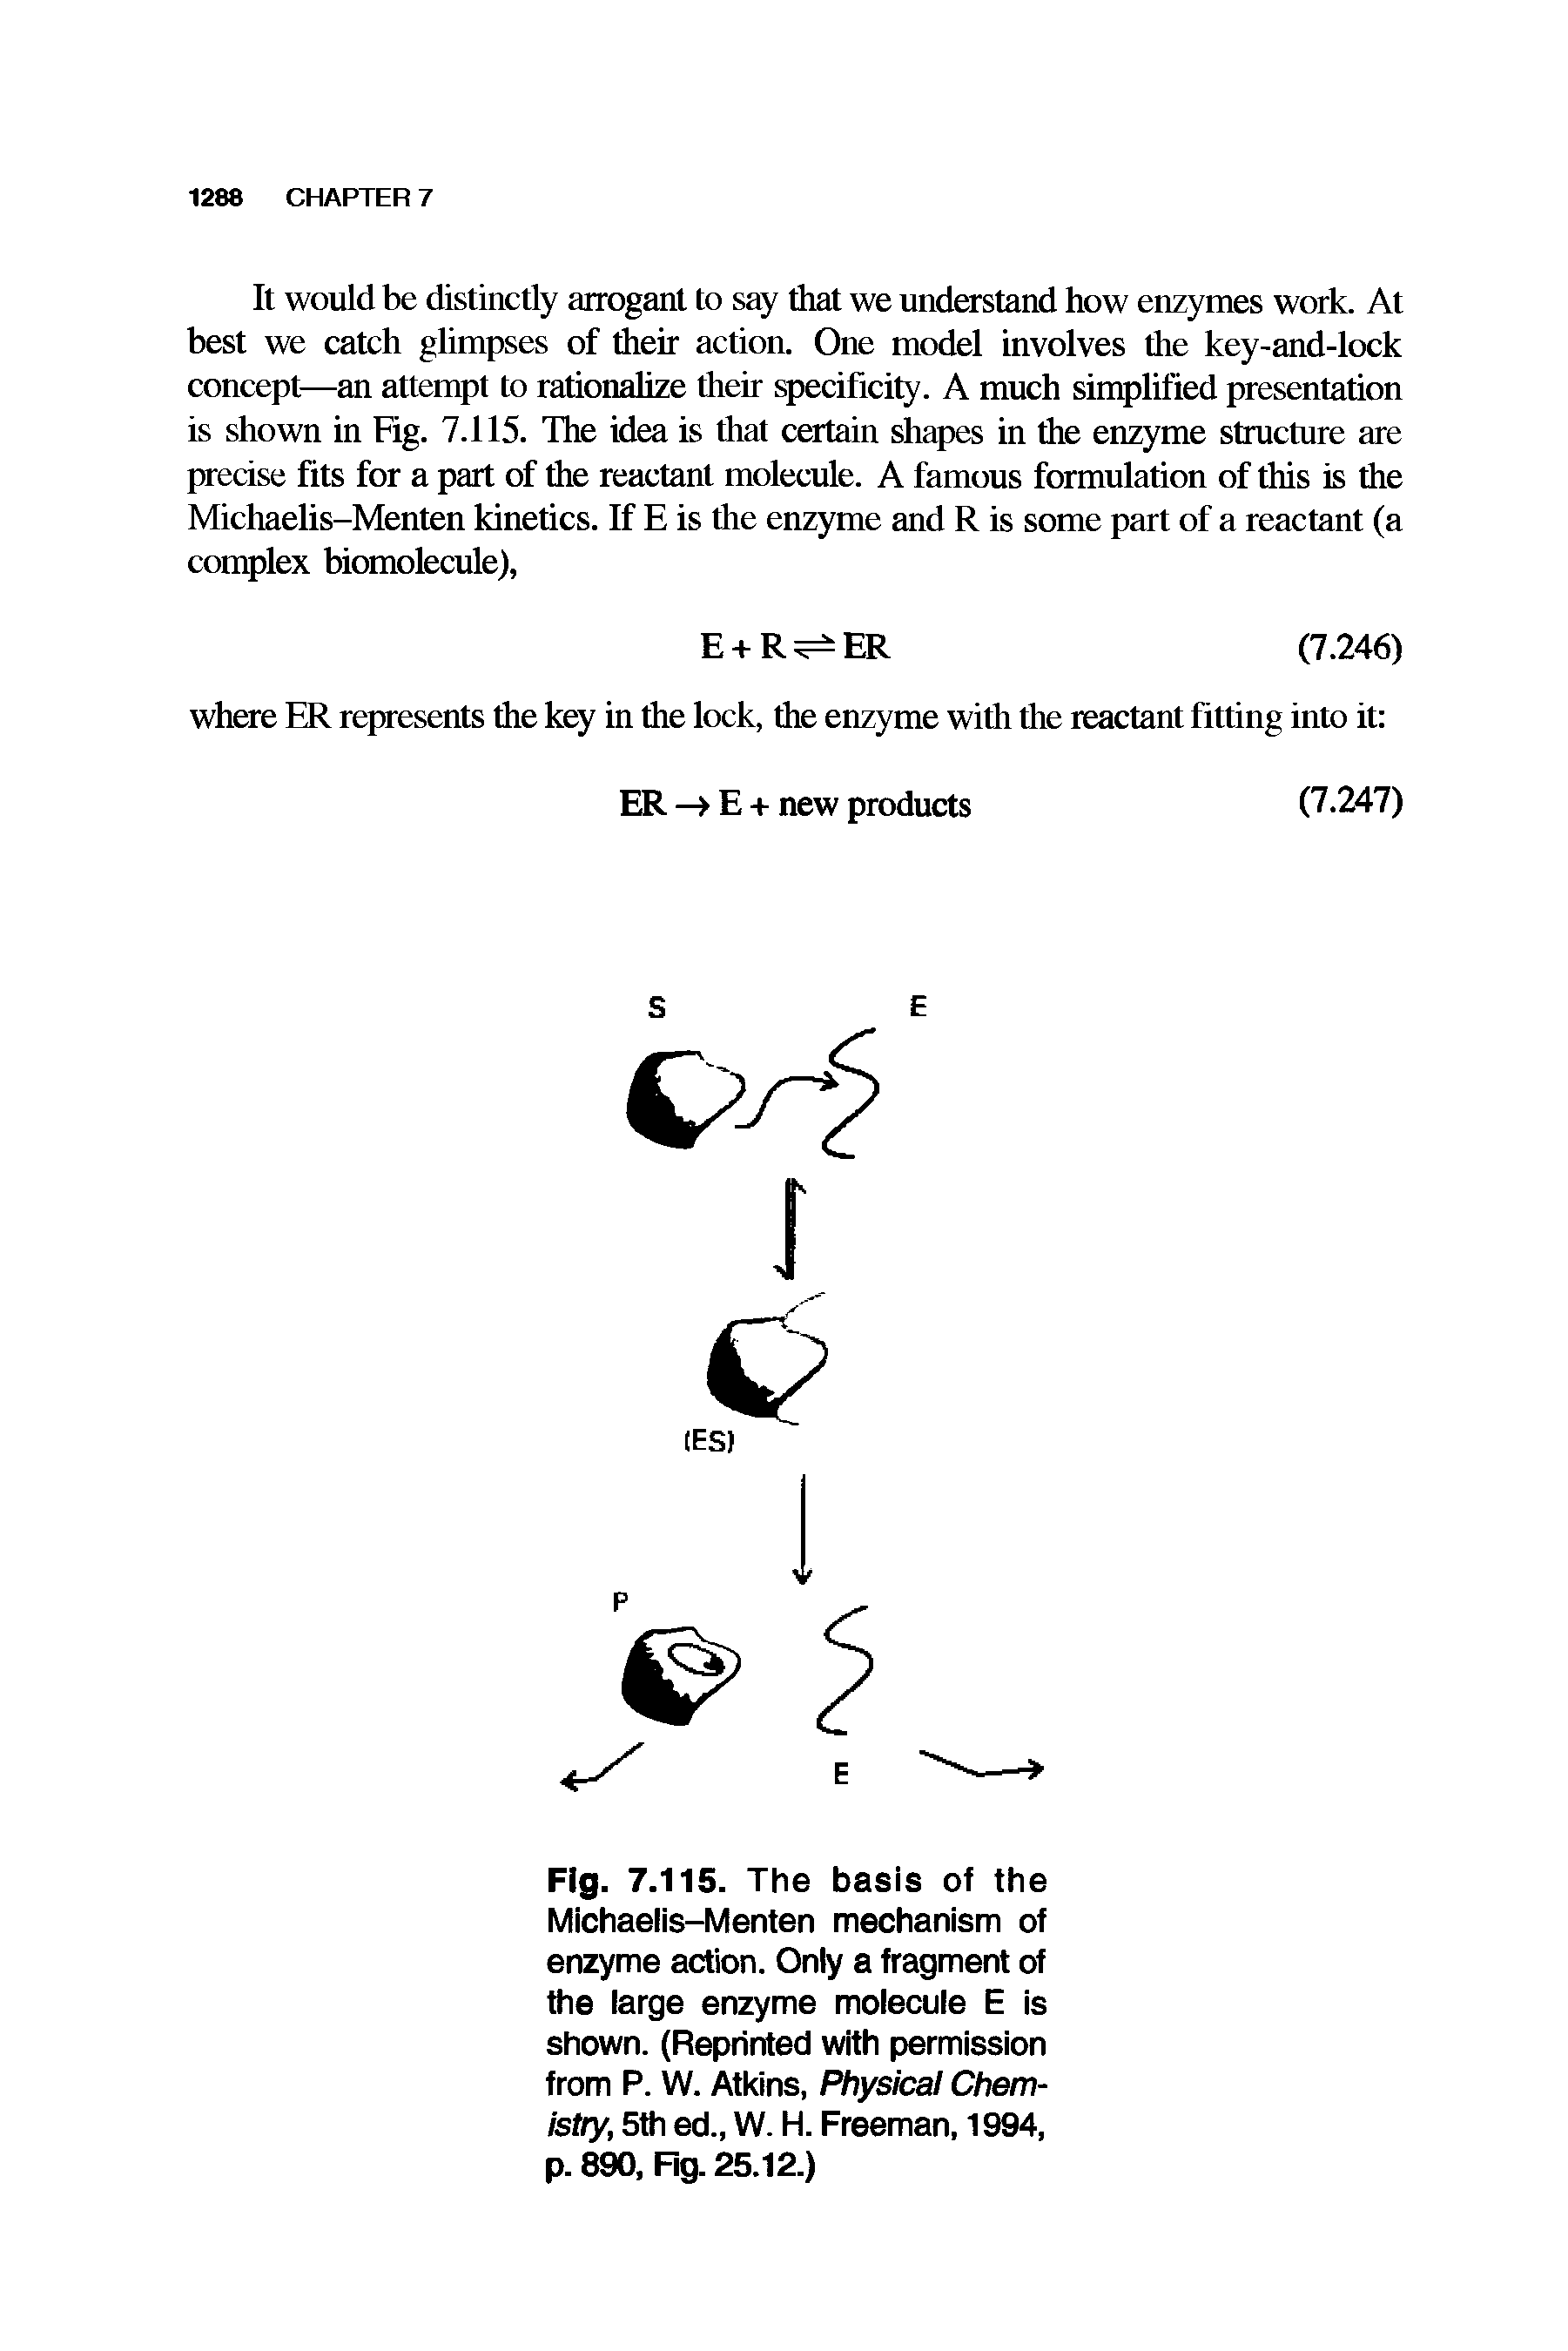 Fig. 7.1 15. The basis of the Michaelis-Menten mechanism of enzyme action. Only a fragment of the large enzyme molecule E is shown. (Reprinted with permission from P. W. Atkins, Physical Chemistry, 5th ed., W. H. Freeman, 1994, p. 890, Fig. 25.12.)...